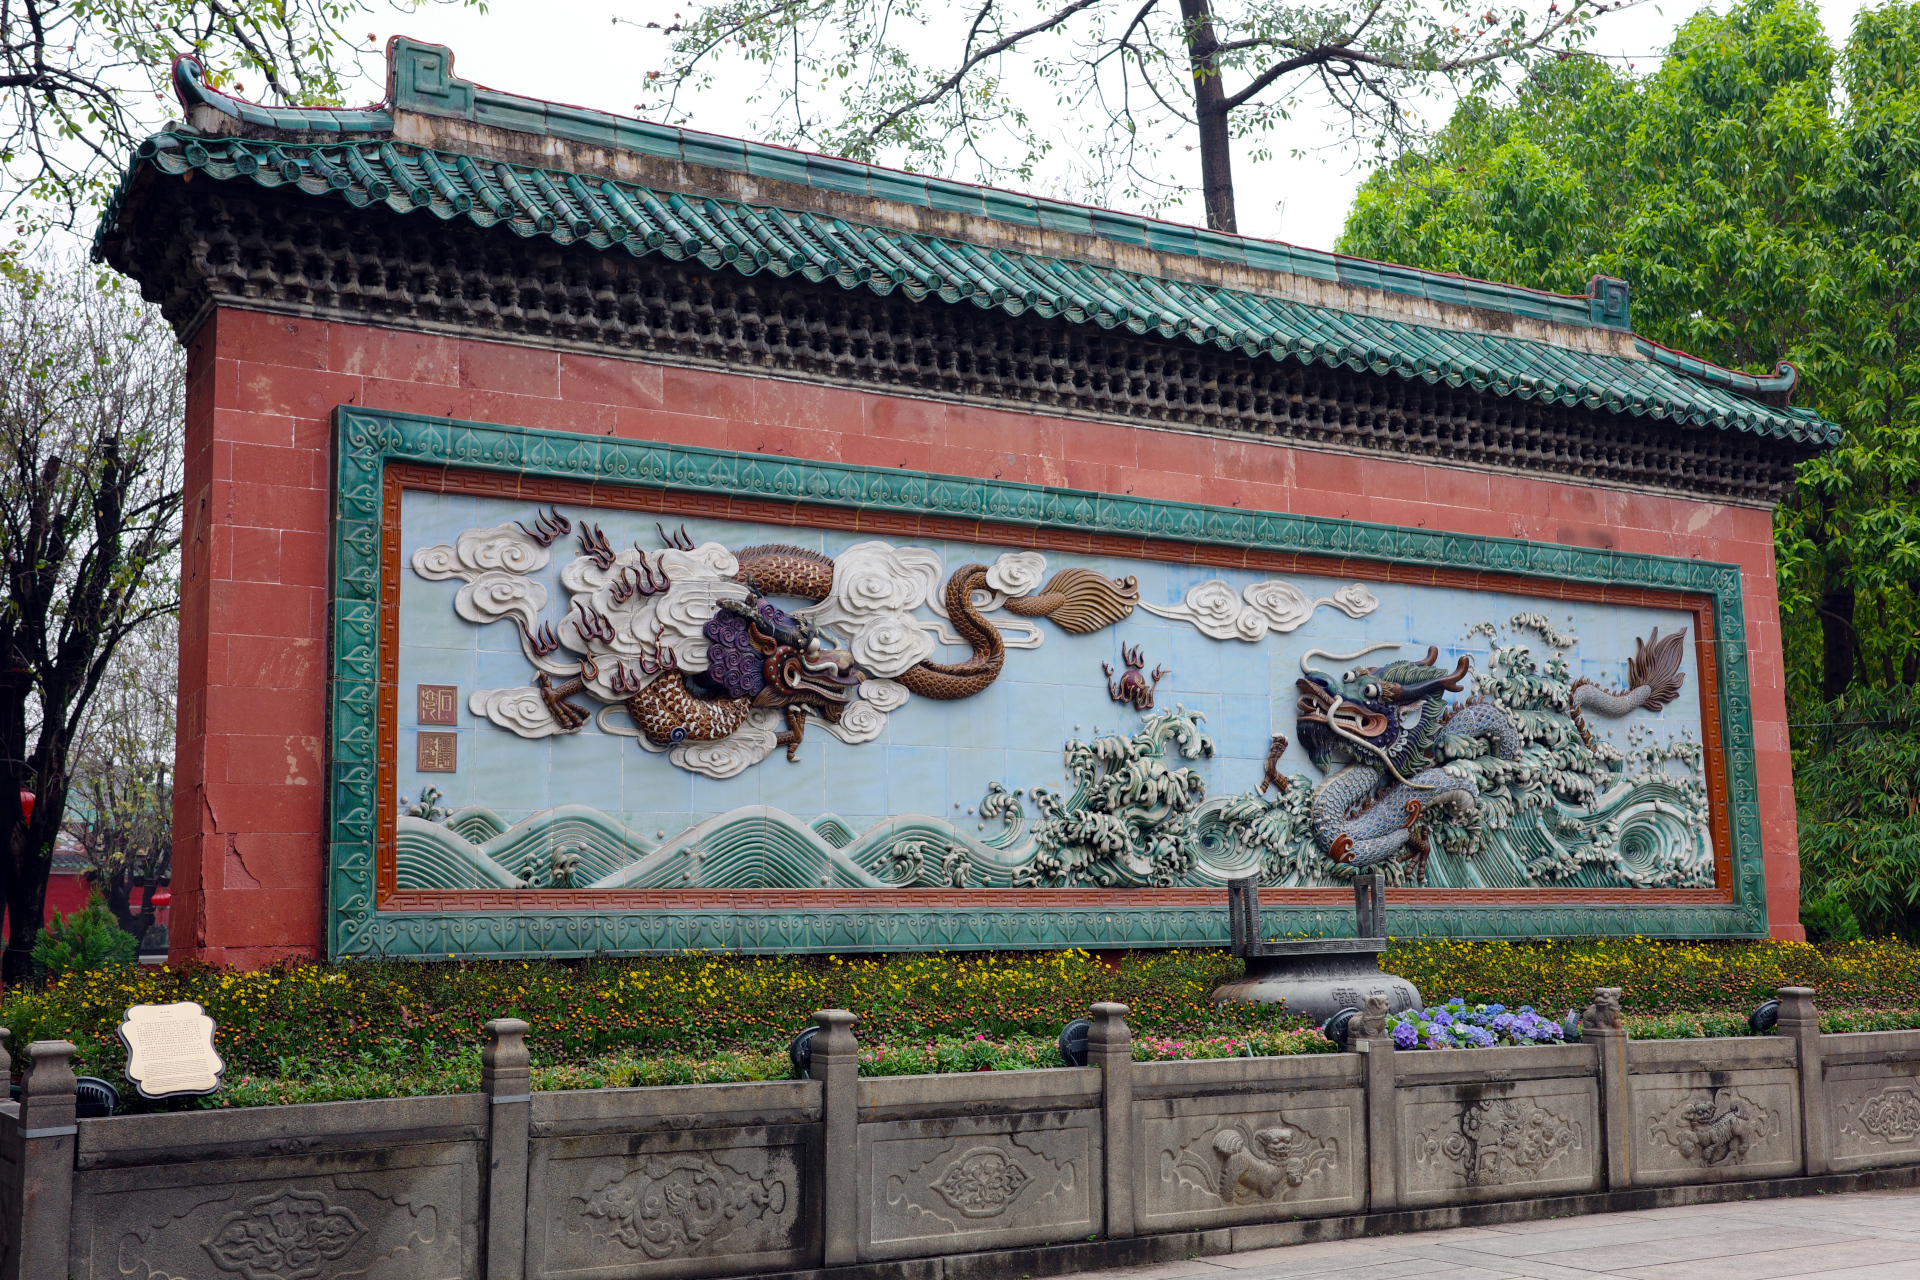 A decorative wall featuring two dragons